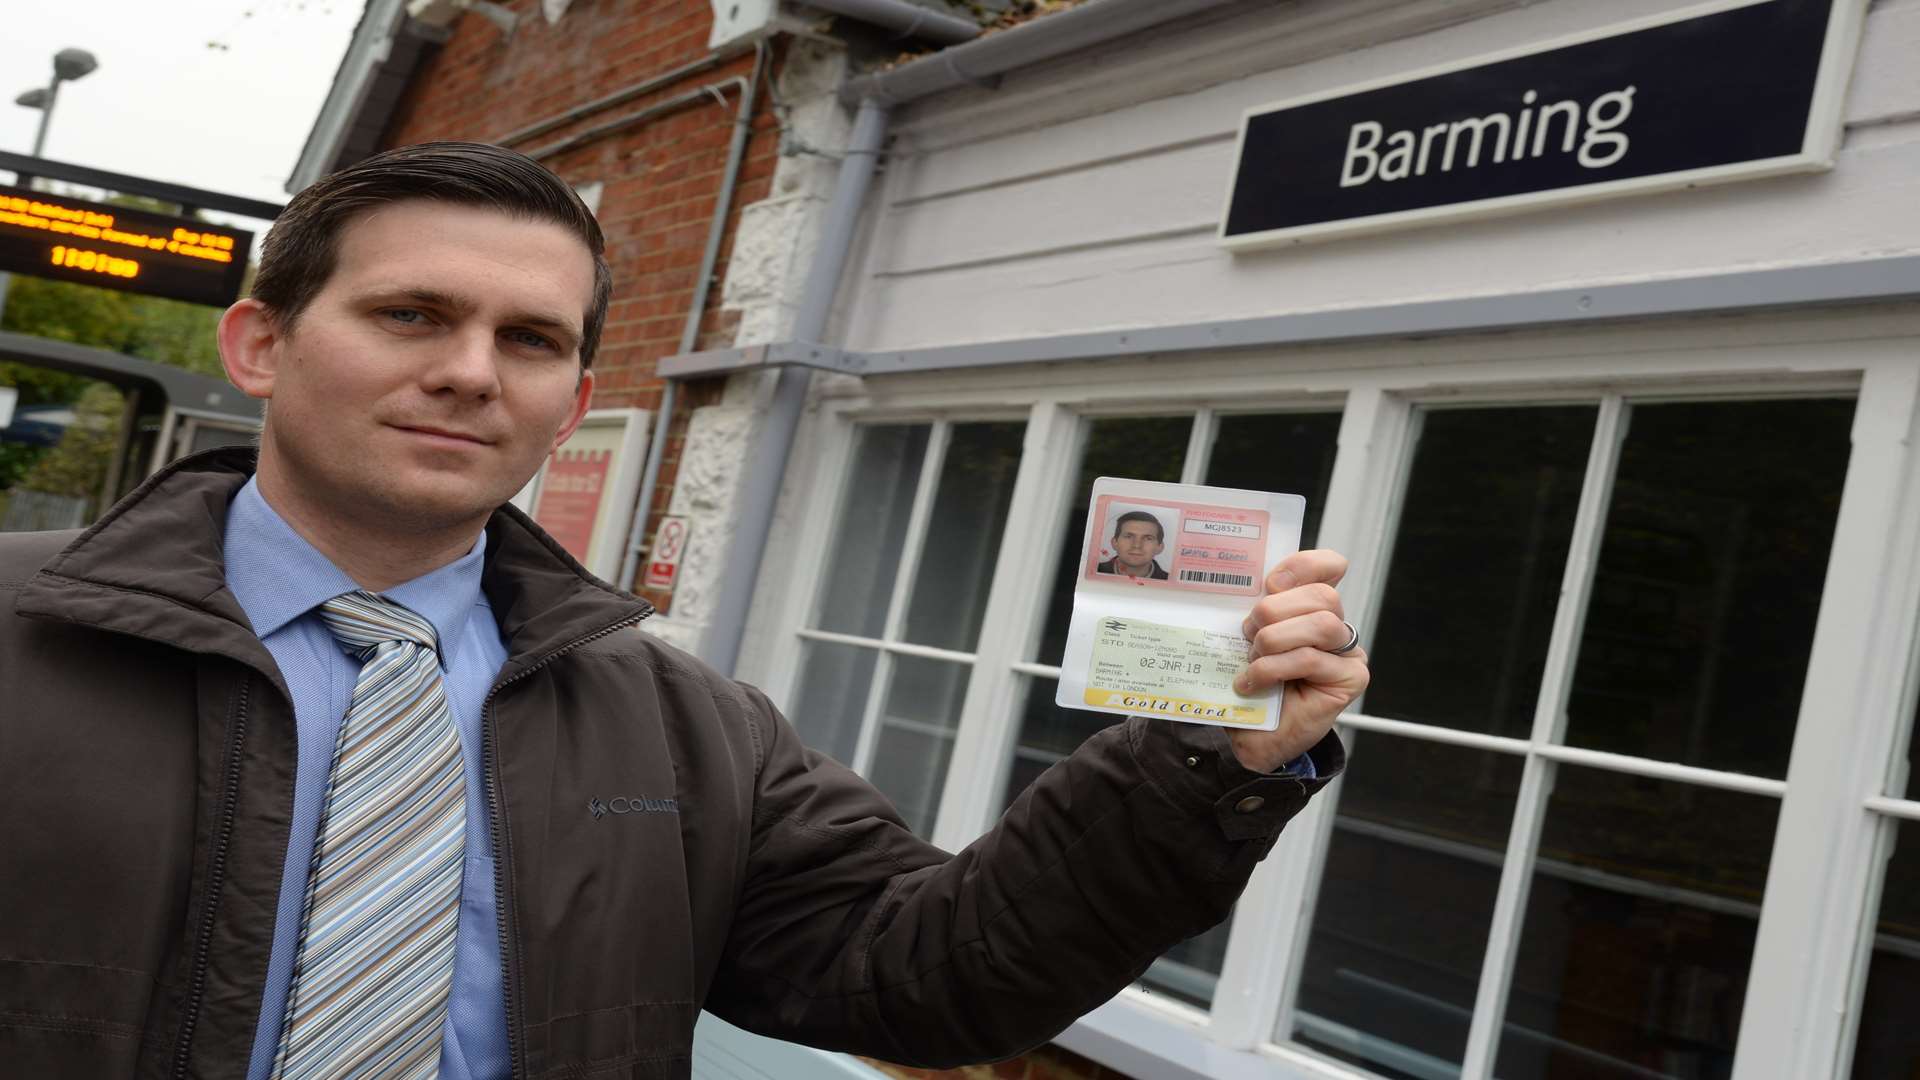 Commuter David Dixon of Barming who was fined by Southeastern